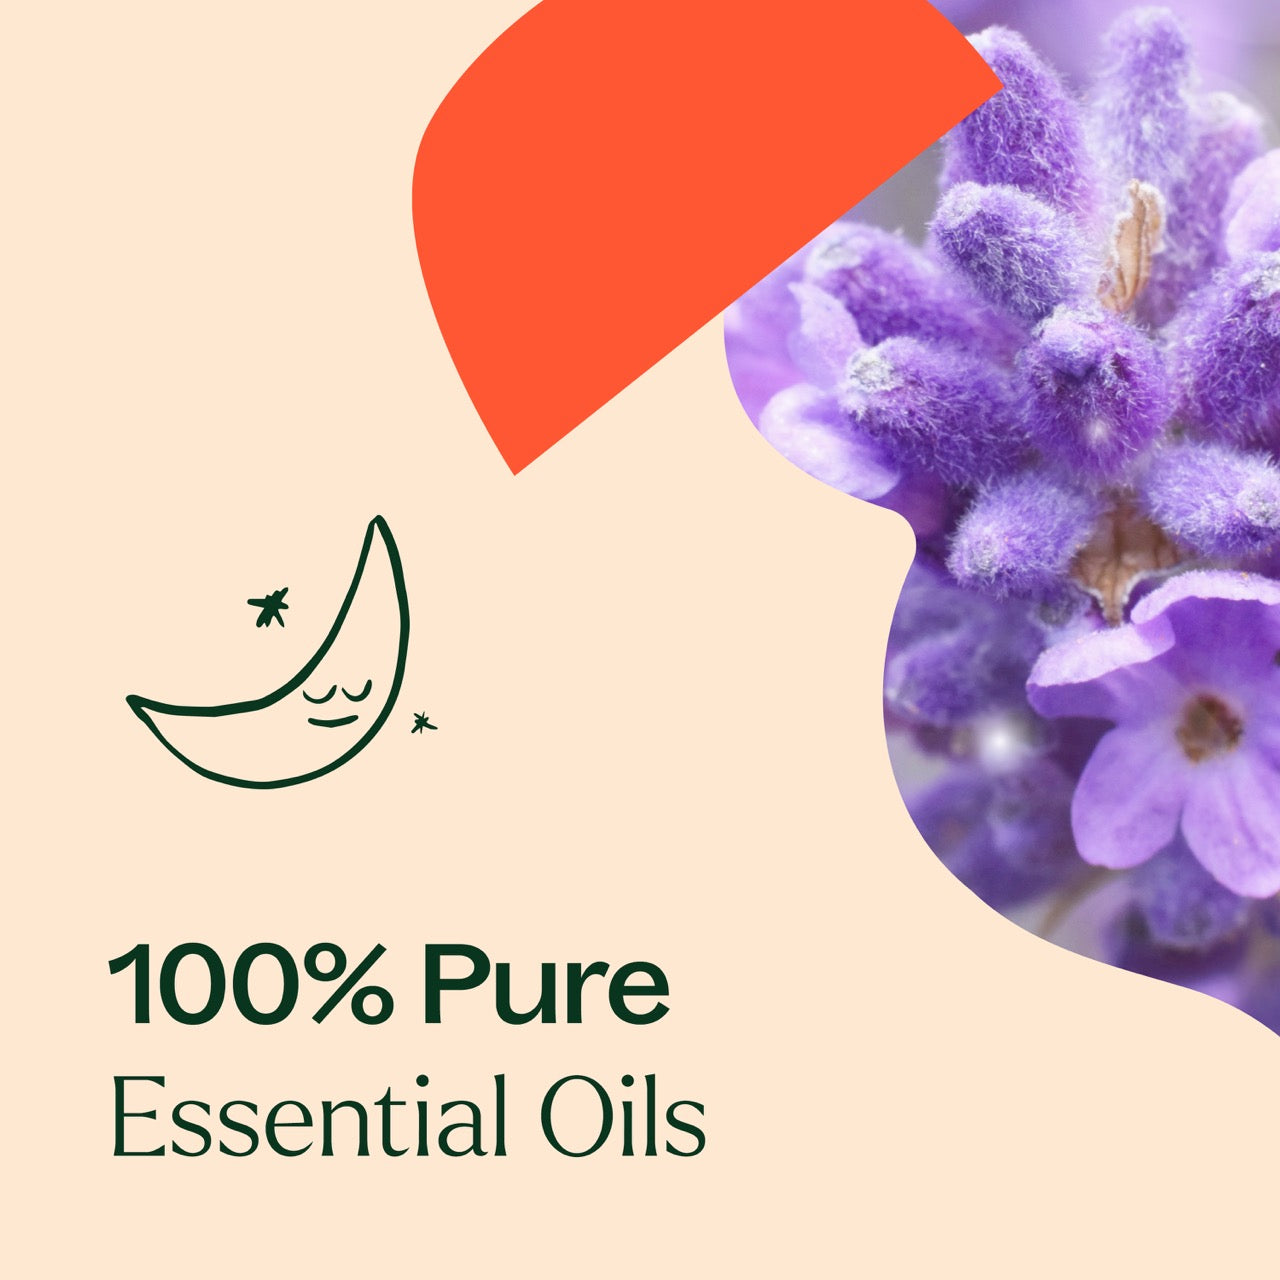 Nighty Night KidSafe Essential Oil is made from 100% pure essential oils